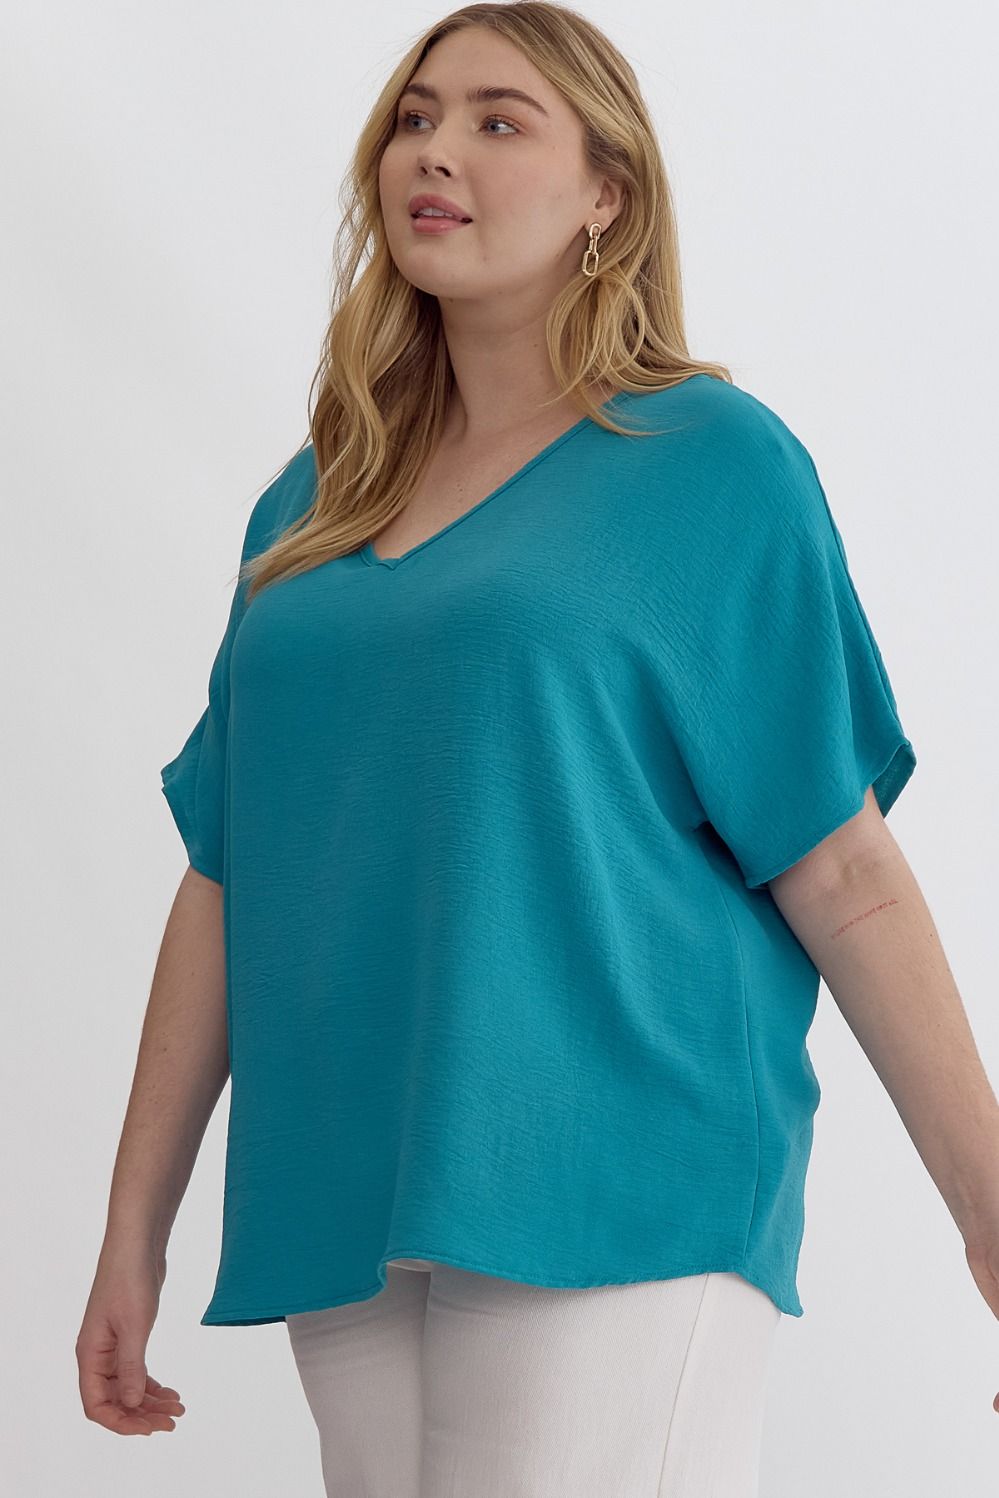 V-Neck Plus Size Top - Turquoise